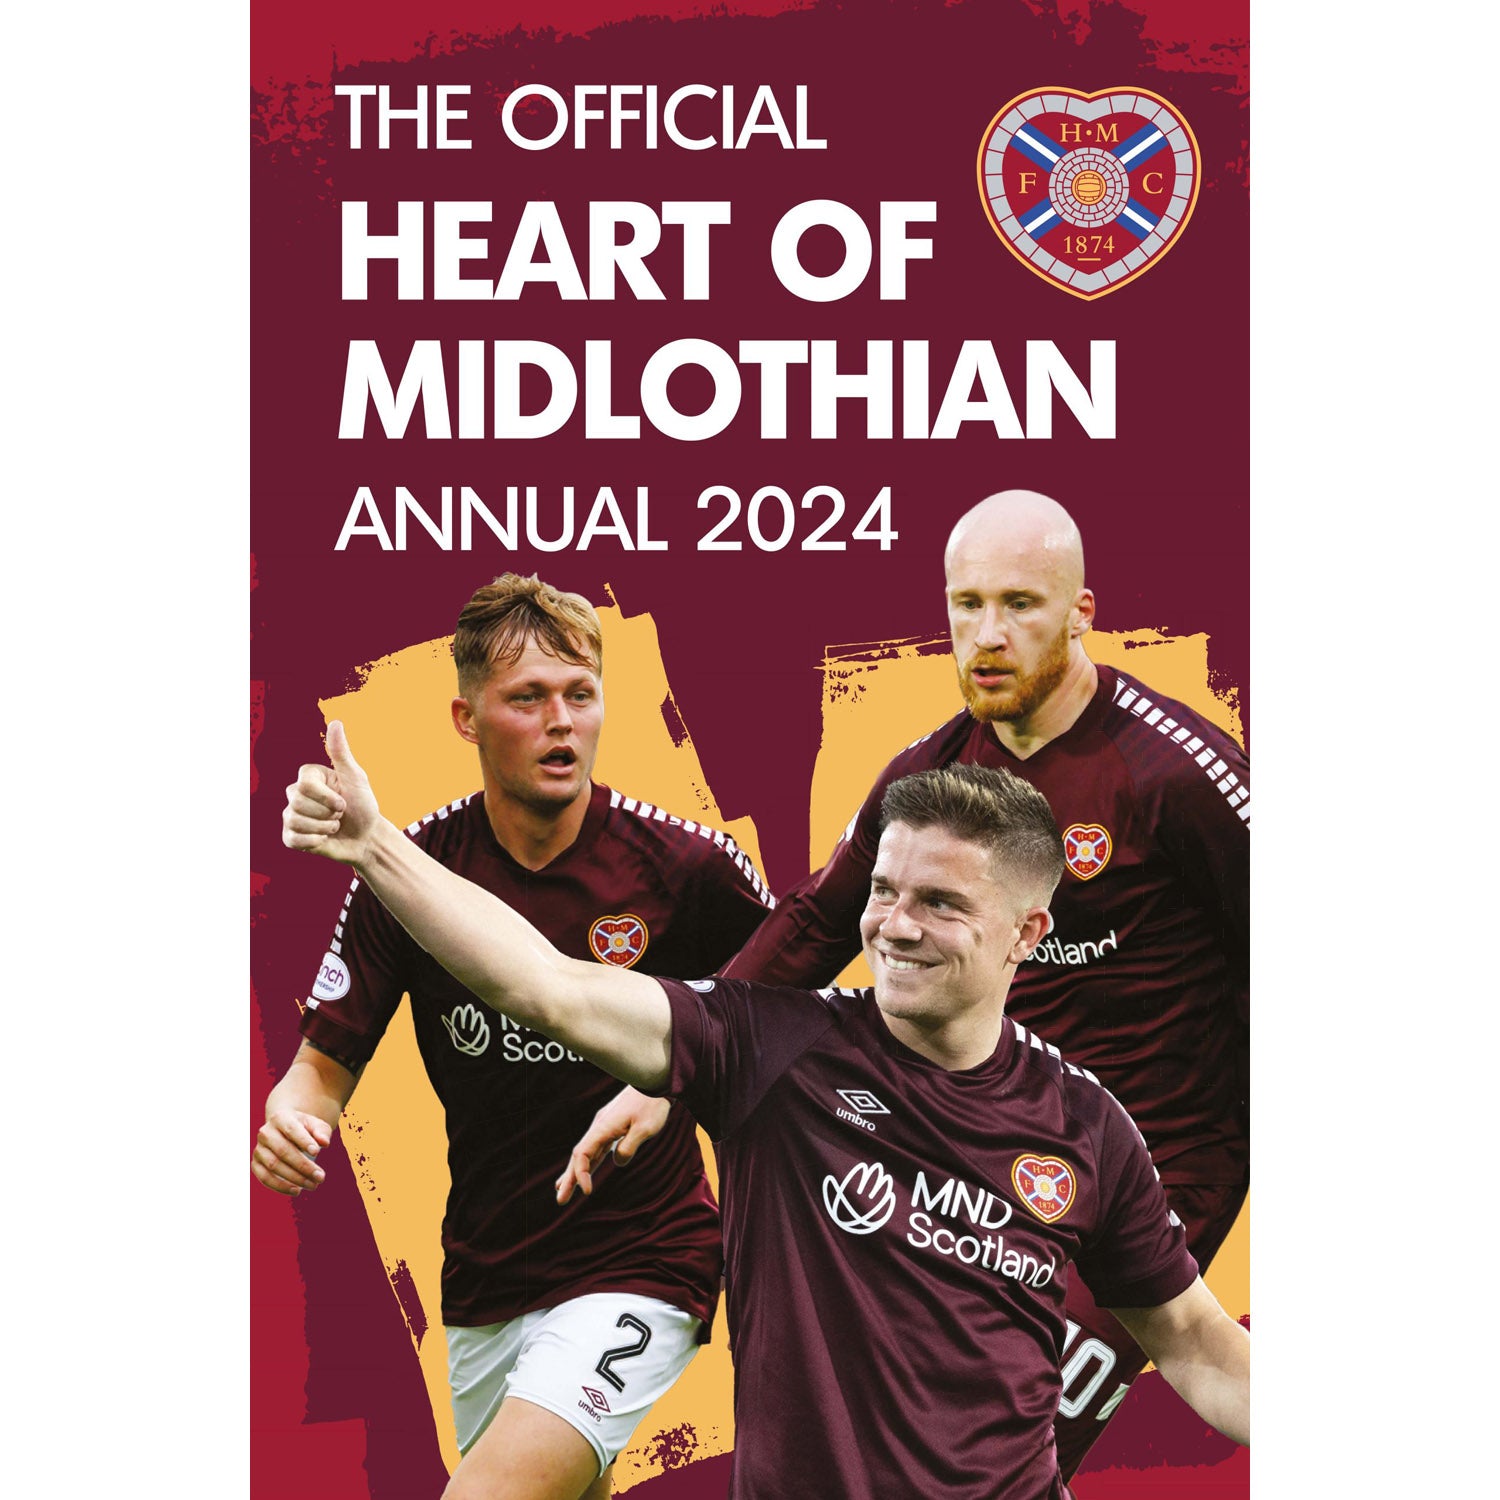 The Official Heart of Midlothian Annual 2024